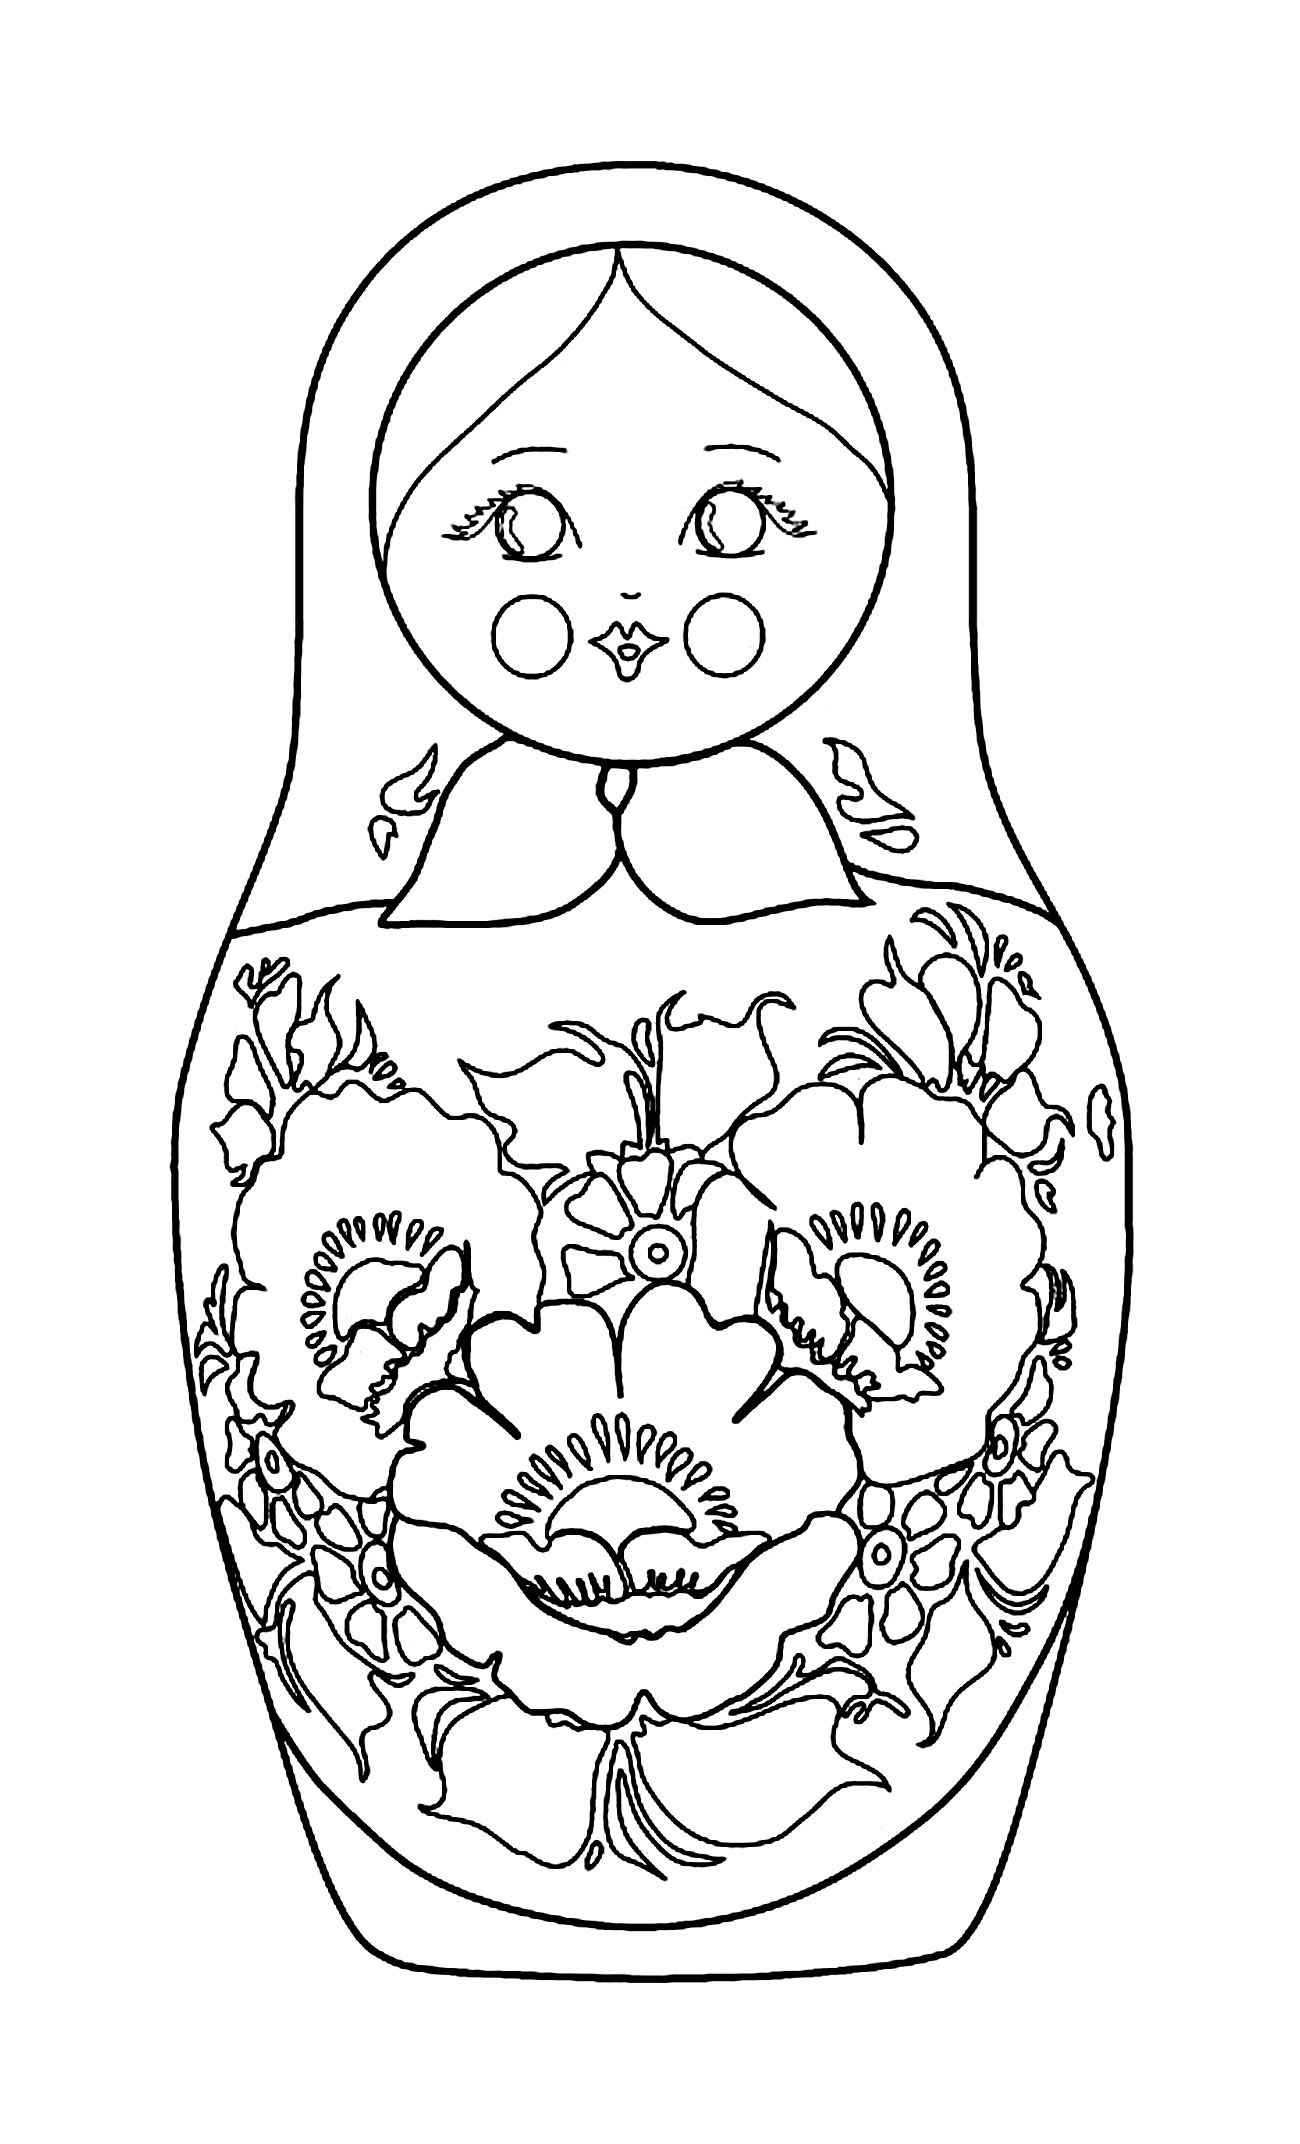 Russian doll with beautiful flowers Russian dolls Adult Coloring Pages